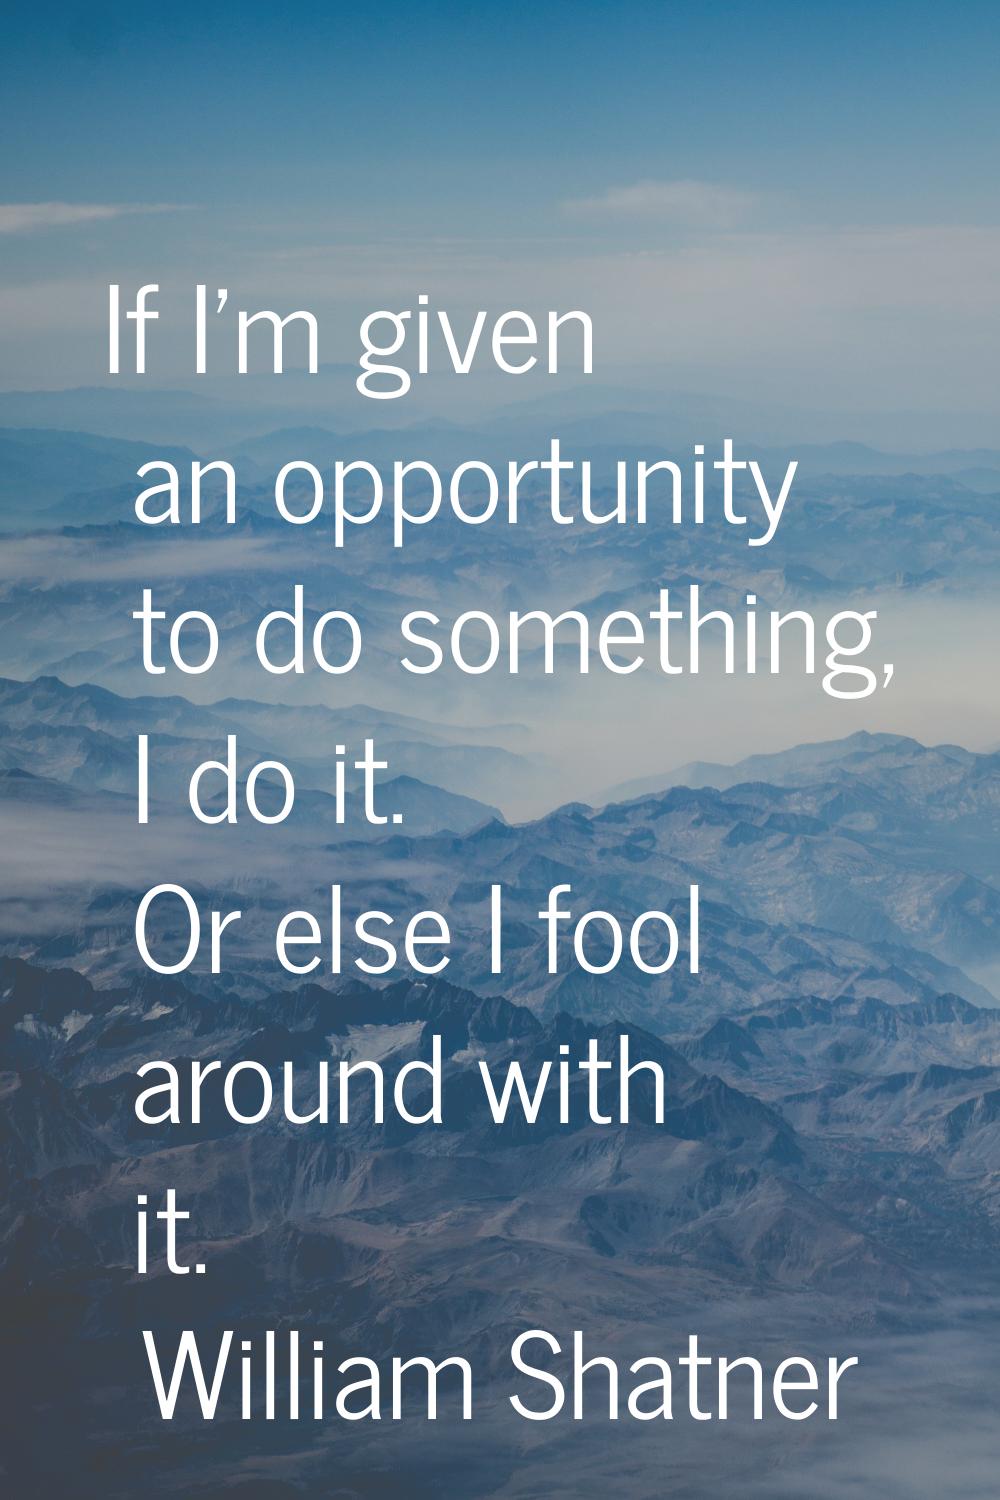 If I'm given an opportunity to do something, I do it. Or else I fool around with it.